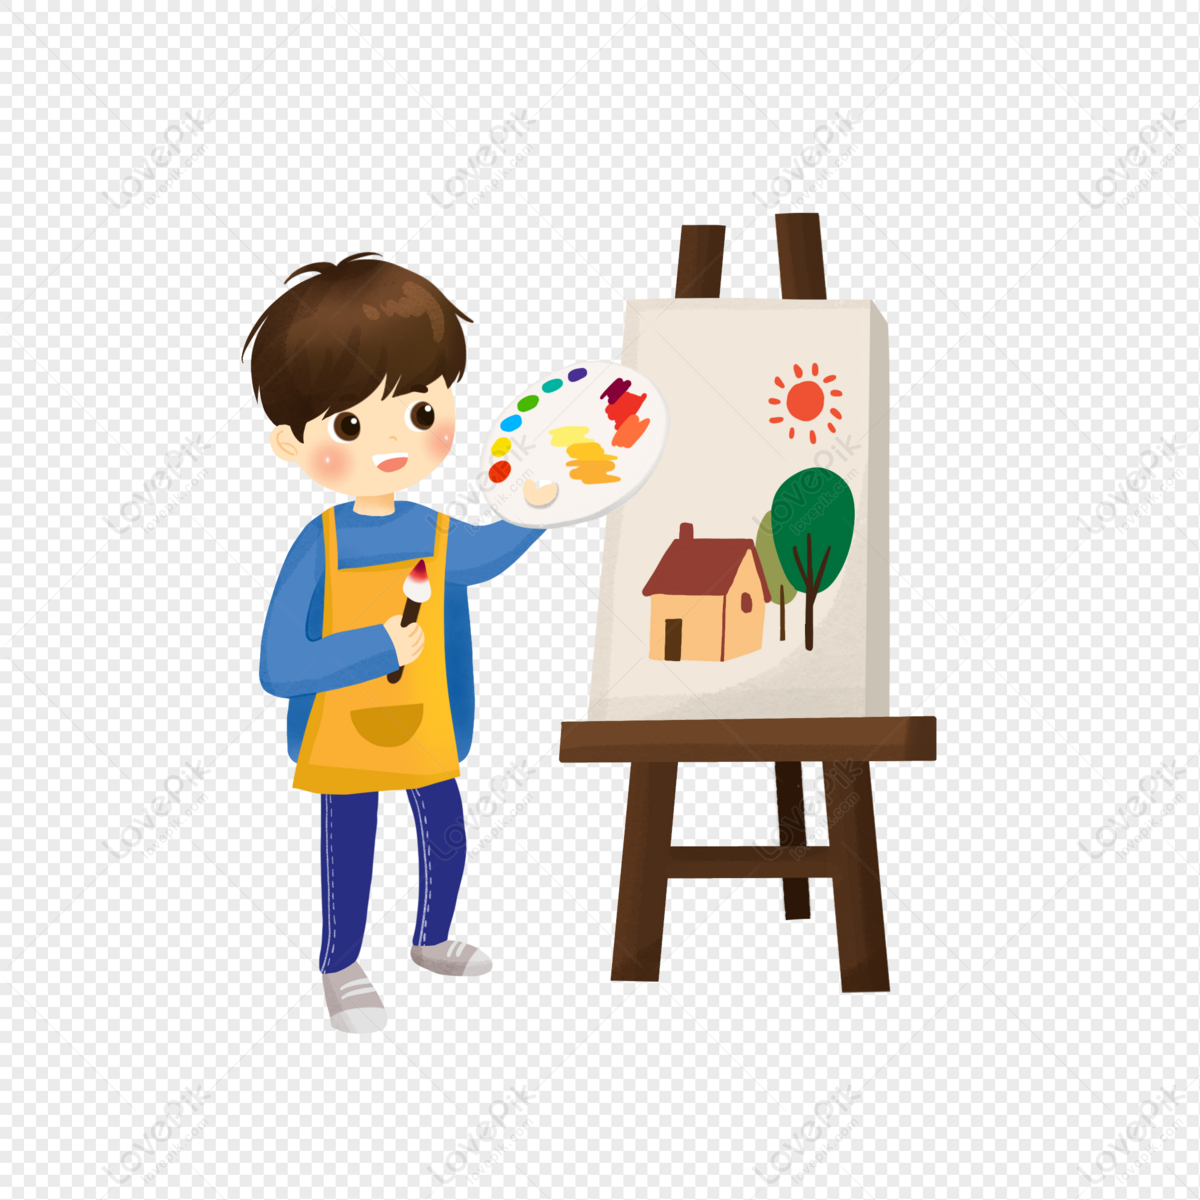 Drawing Cartoon Man Cute, Summer Training, Cute Cartoon Drawing, Art Free  PNG And Clipart Image For Free Download - Lovepik | 401484279